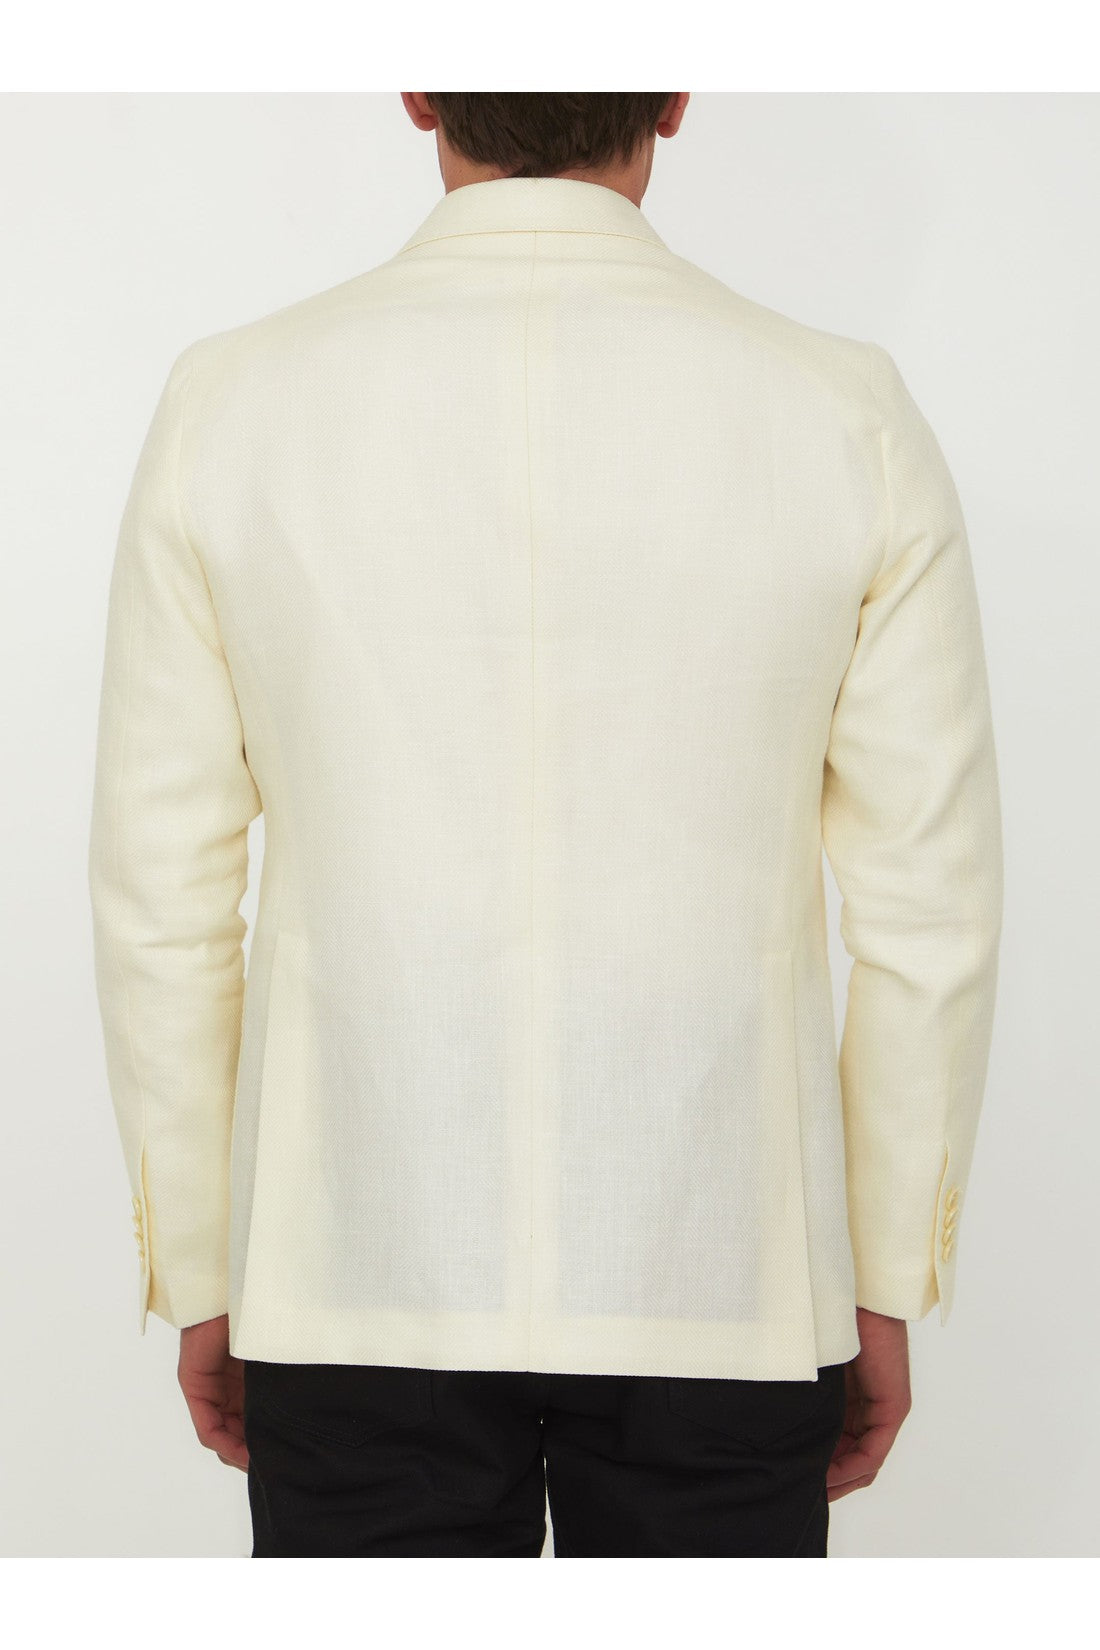 Cream-colored double-breasted jacket